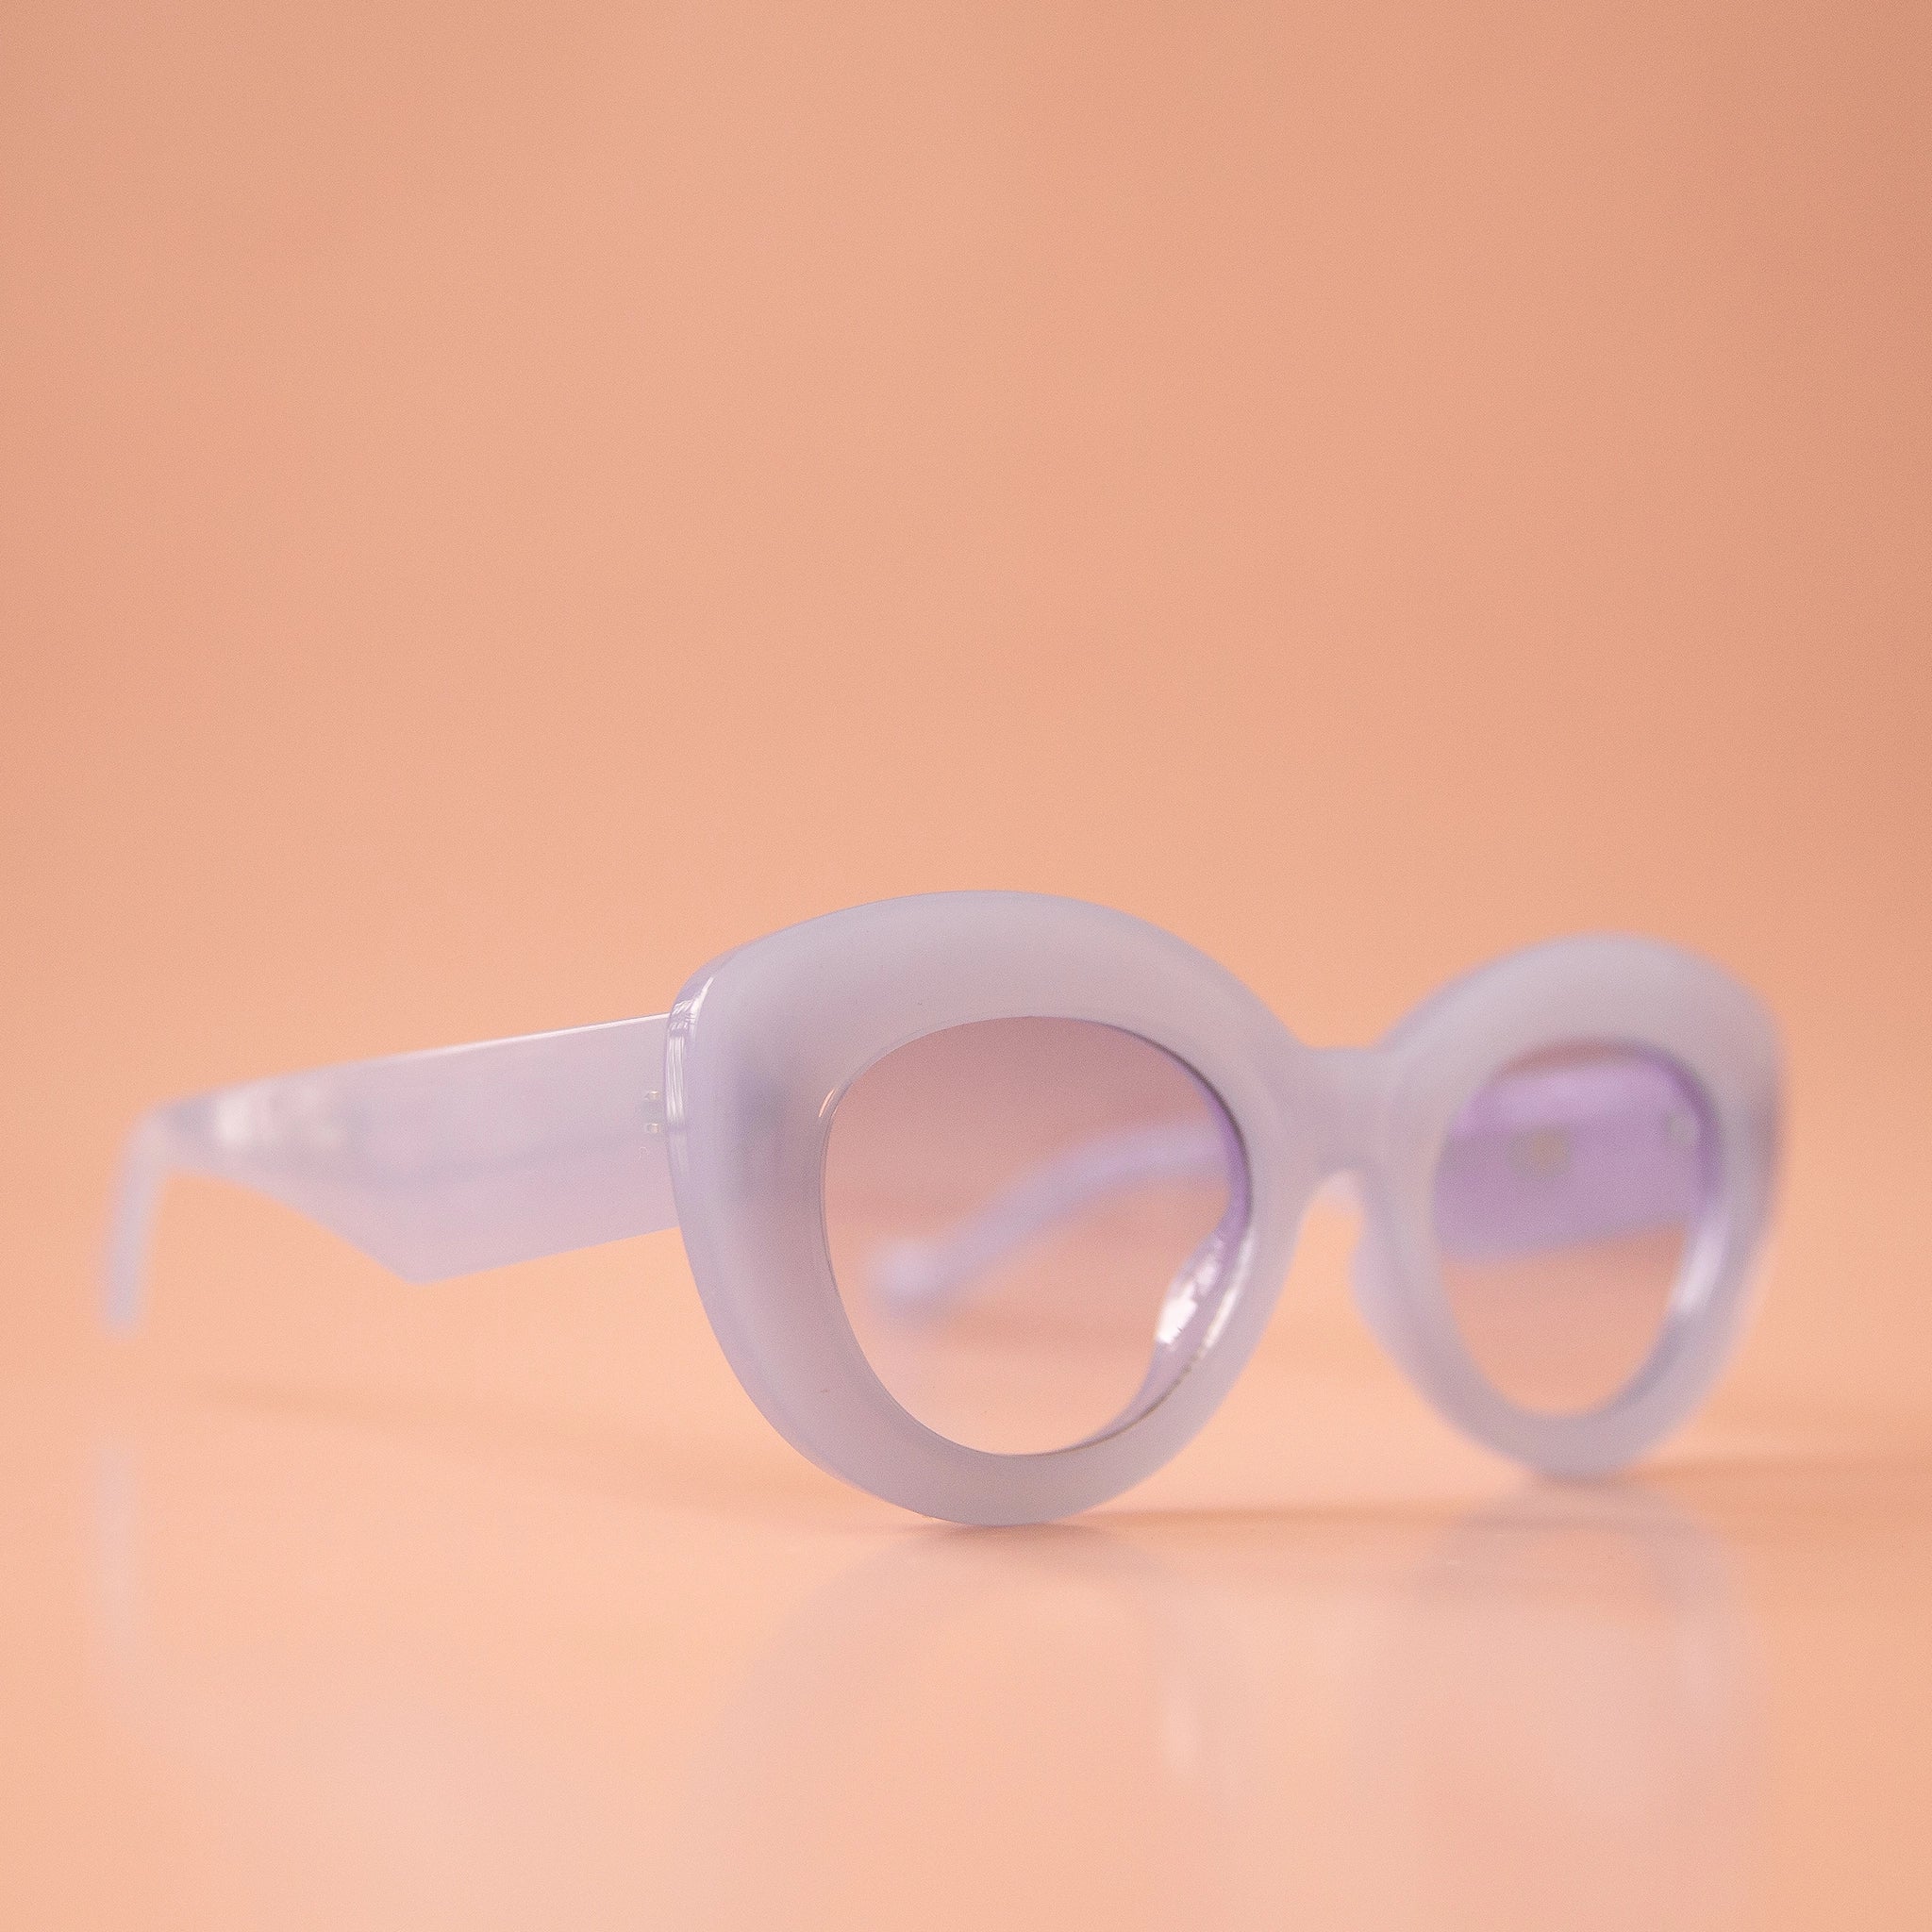 On a peachy background is a pair of light blue sunglasses with a rounded shape and a slight cat eye corner. The lenses are also a light blue shade. 